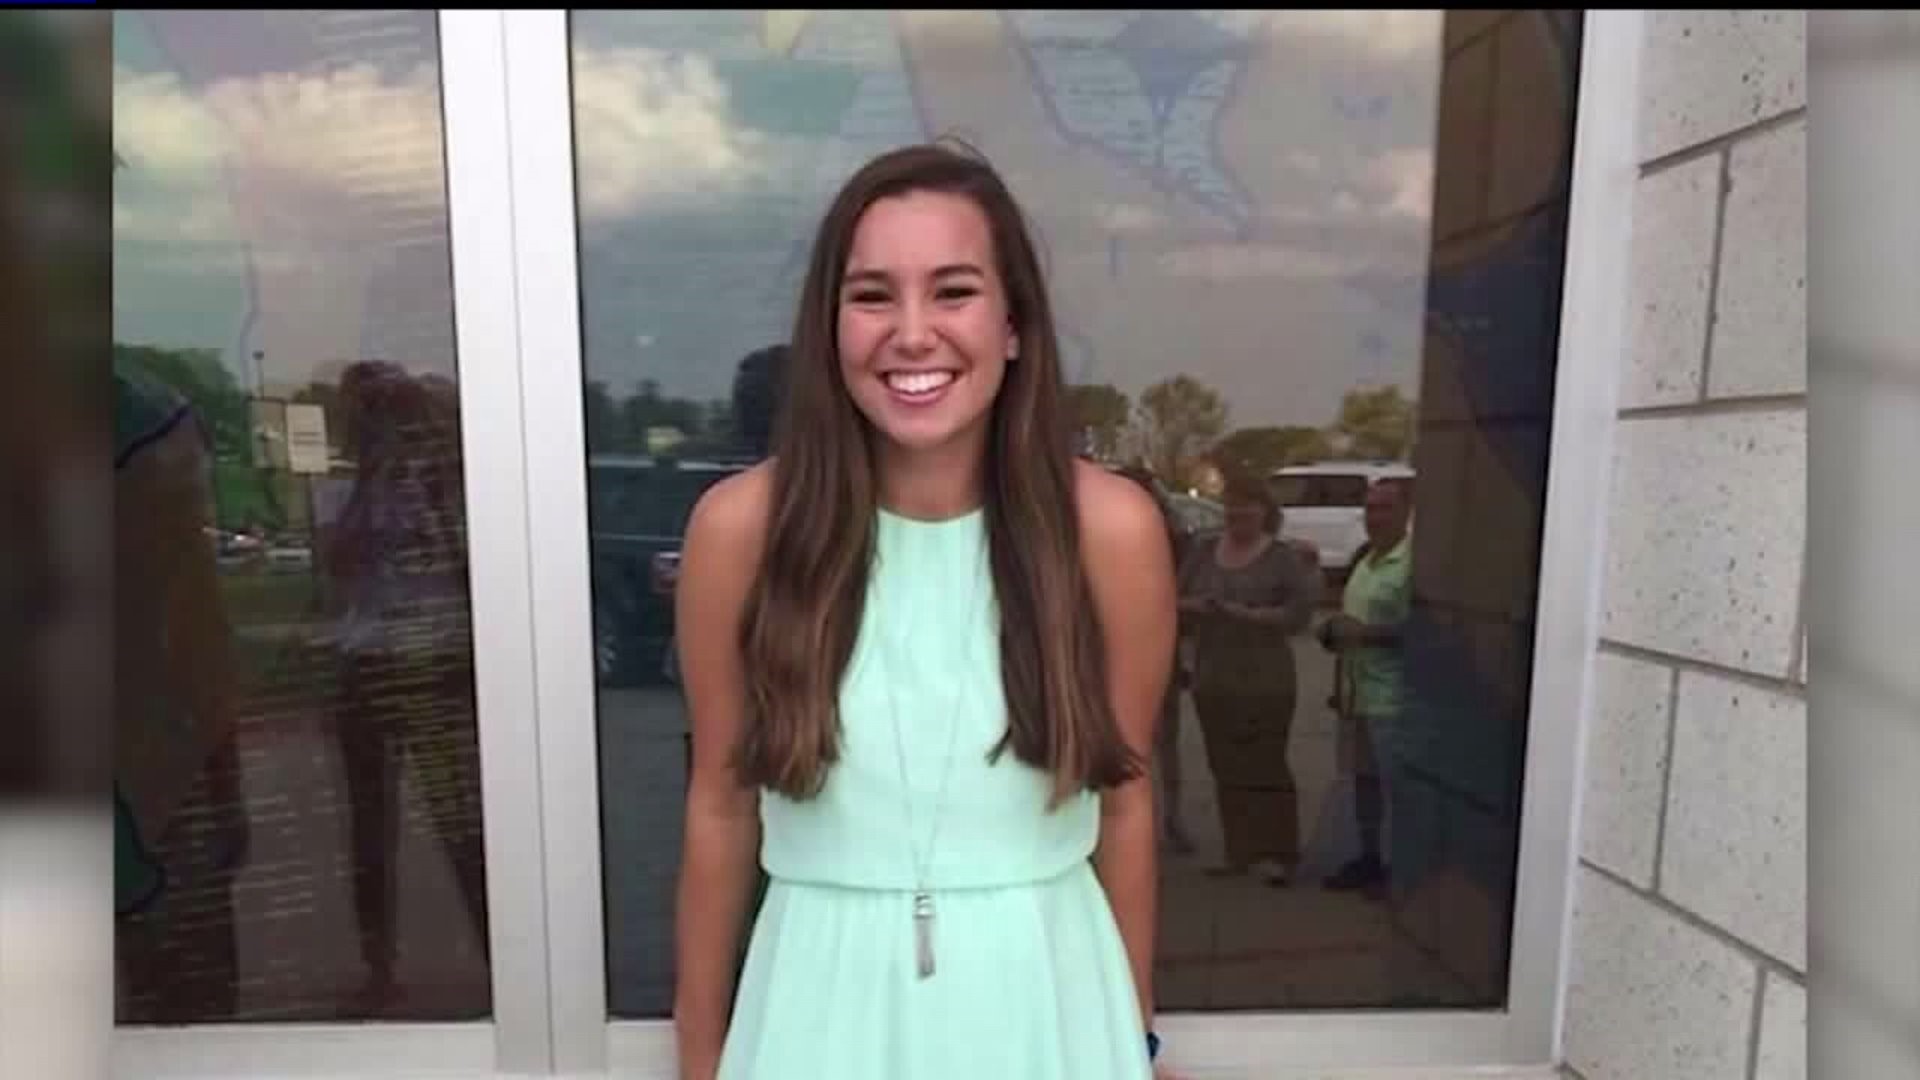 Memorial fund created in honor of Mollie Tibbetts